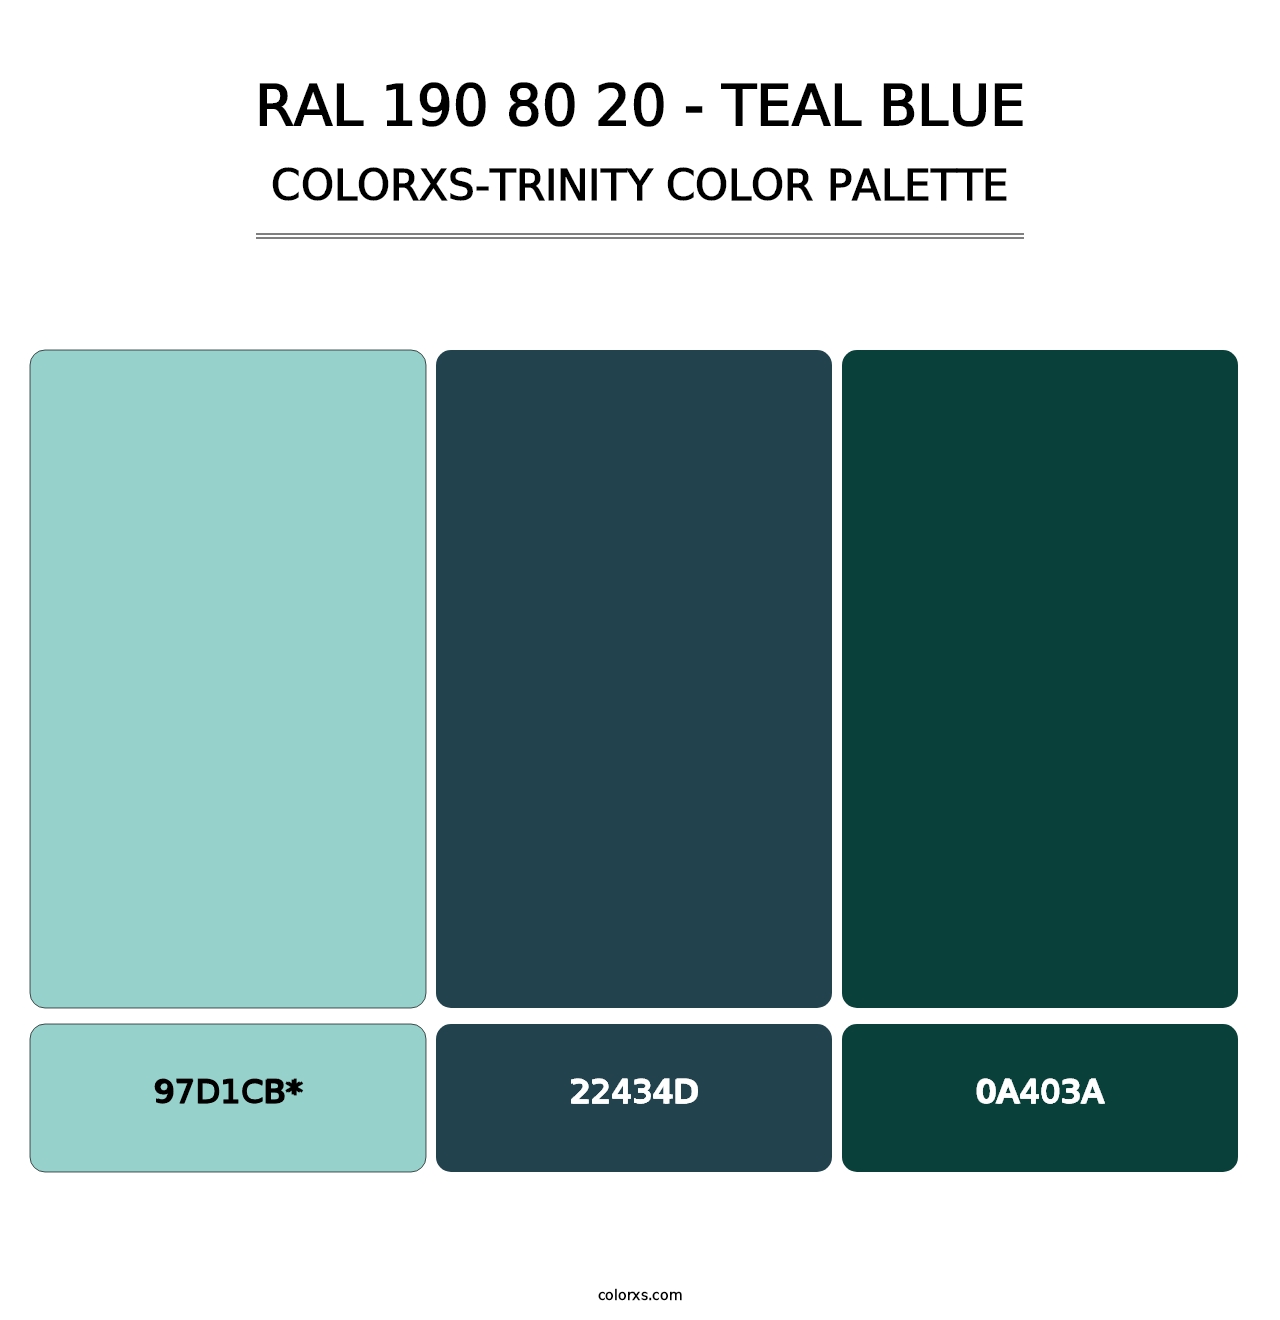 RAL 190 80 20 - Teal Blue - Colorxs Trinity Palette